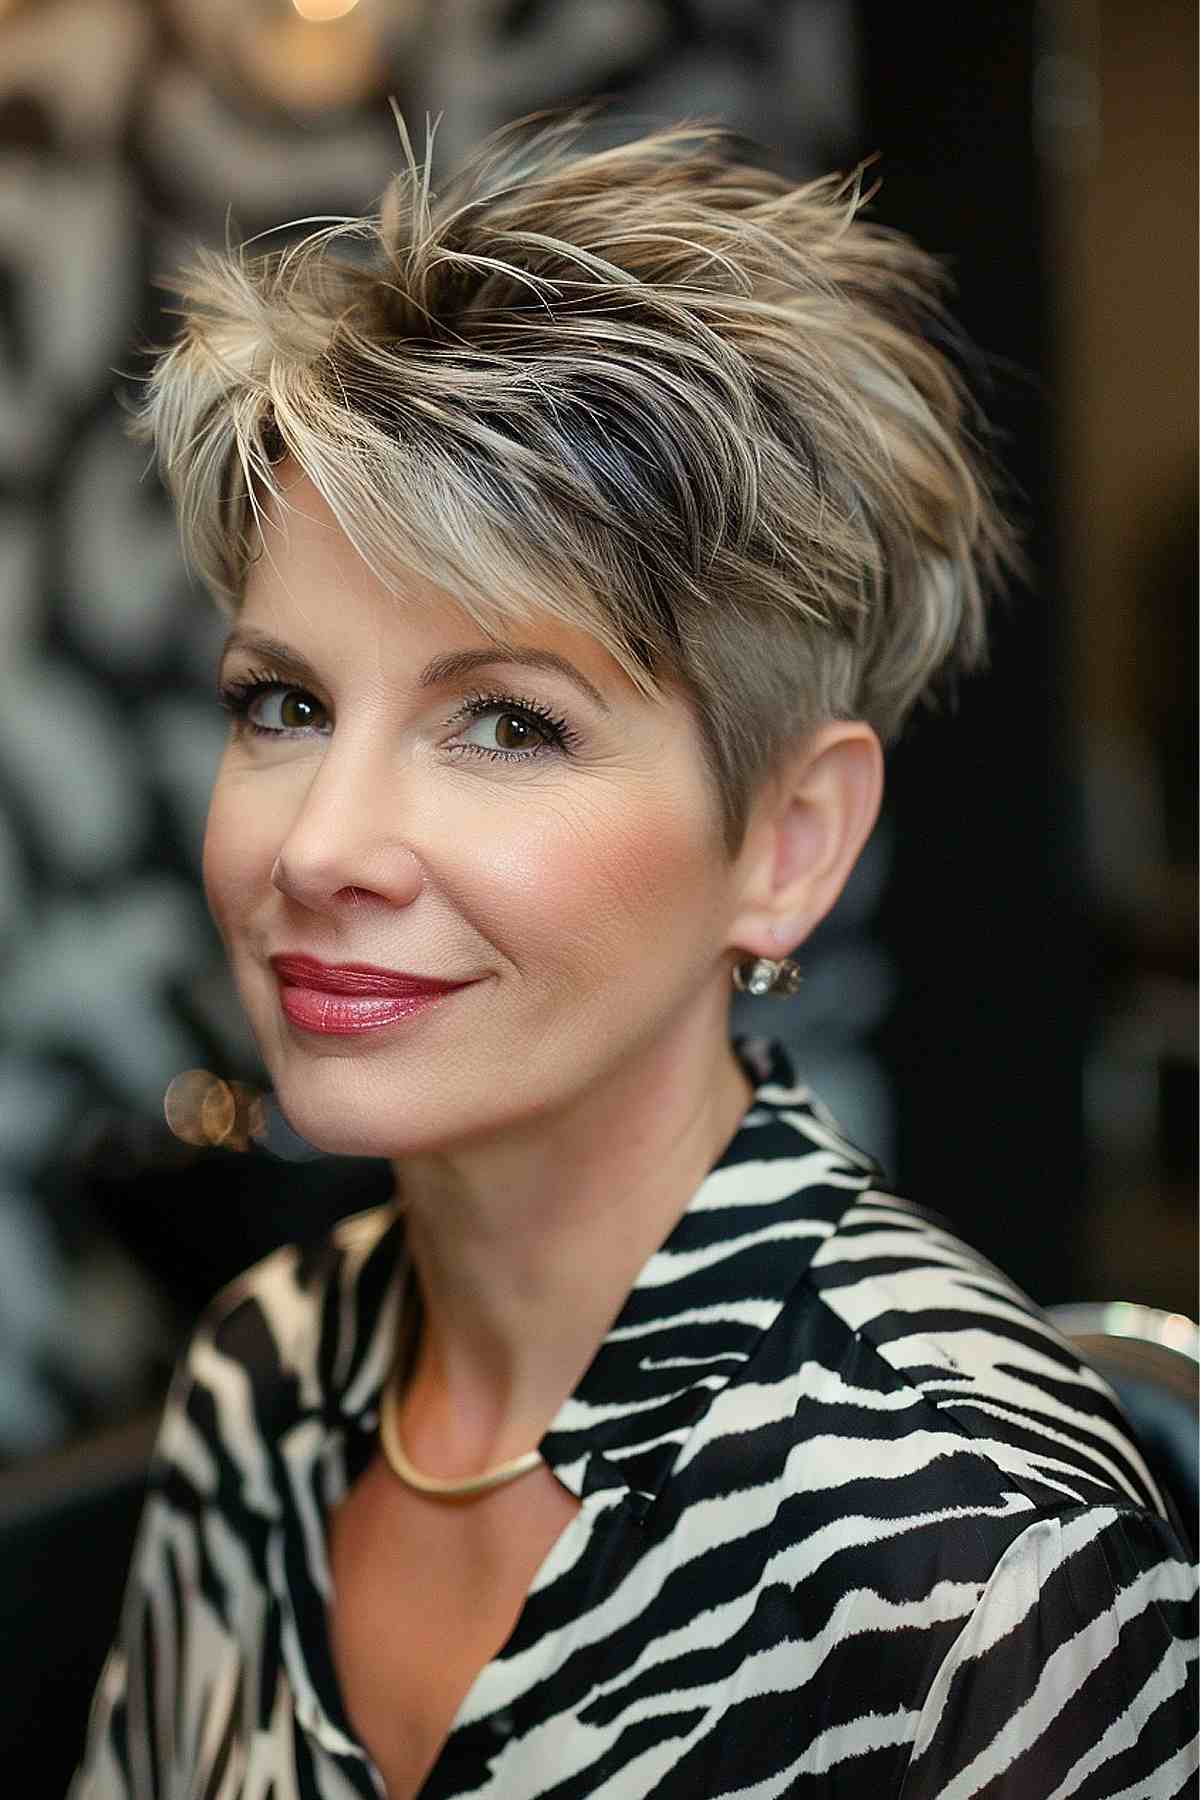 Middle-aged woman with a stylish feathered pixie cut highlighted with natural blonde and silver tones, showcasing volume and texture perfect for a sophisticated yet easy-to-maintain look.